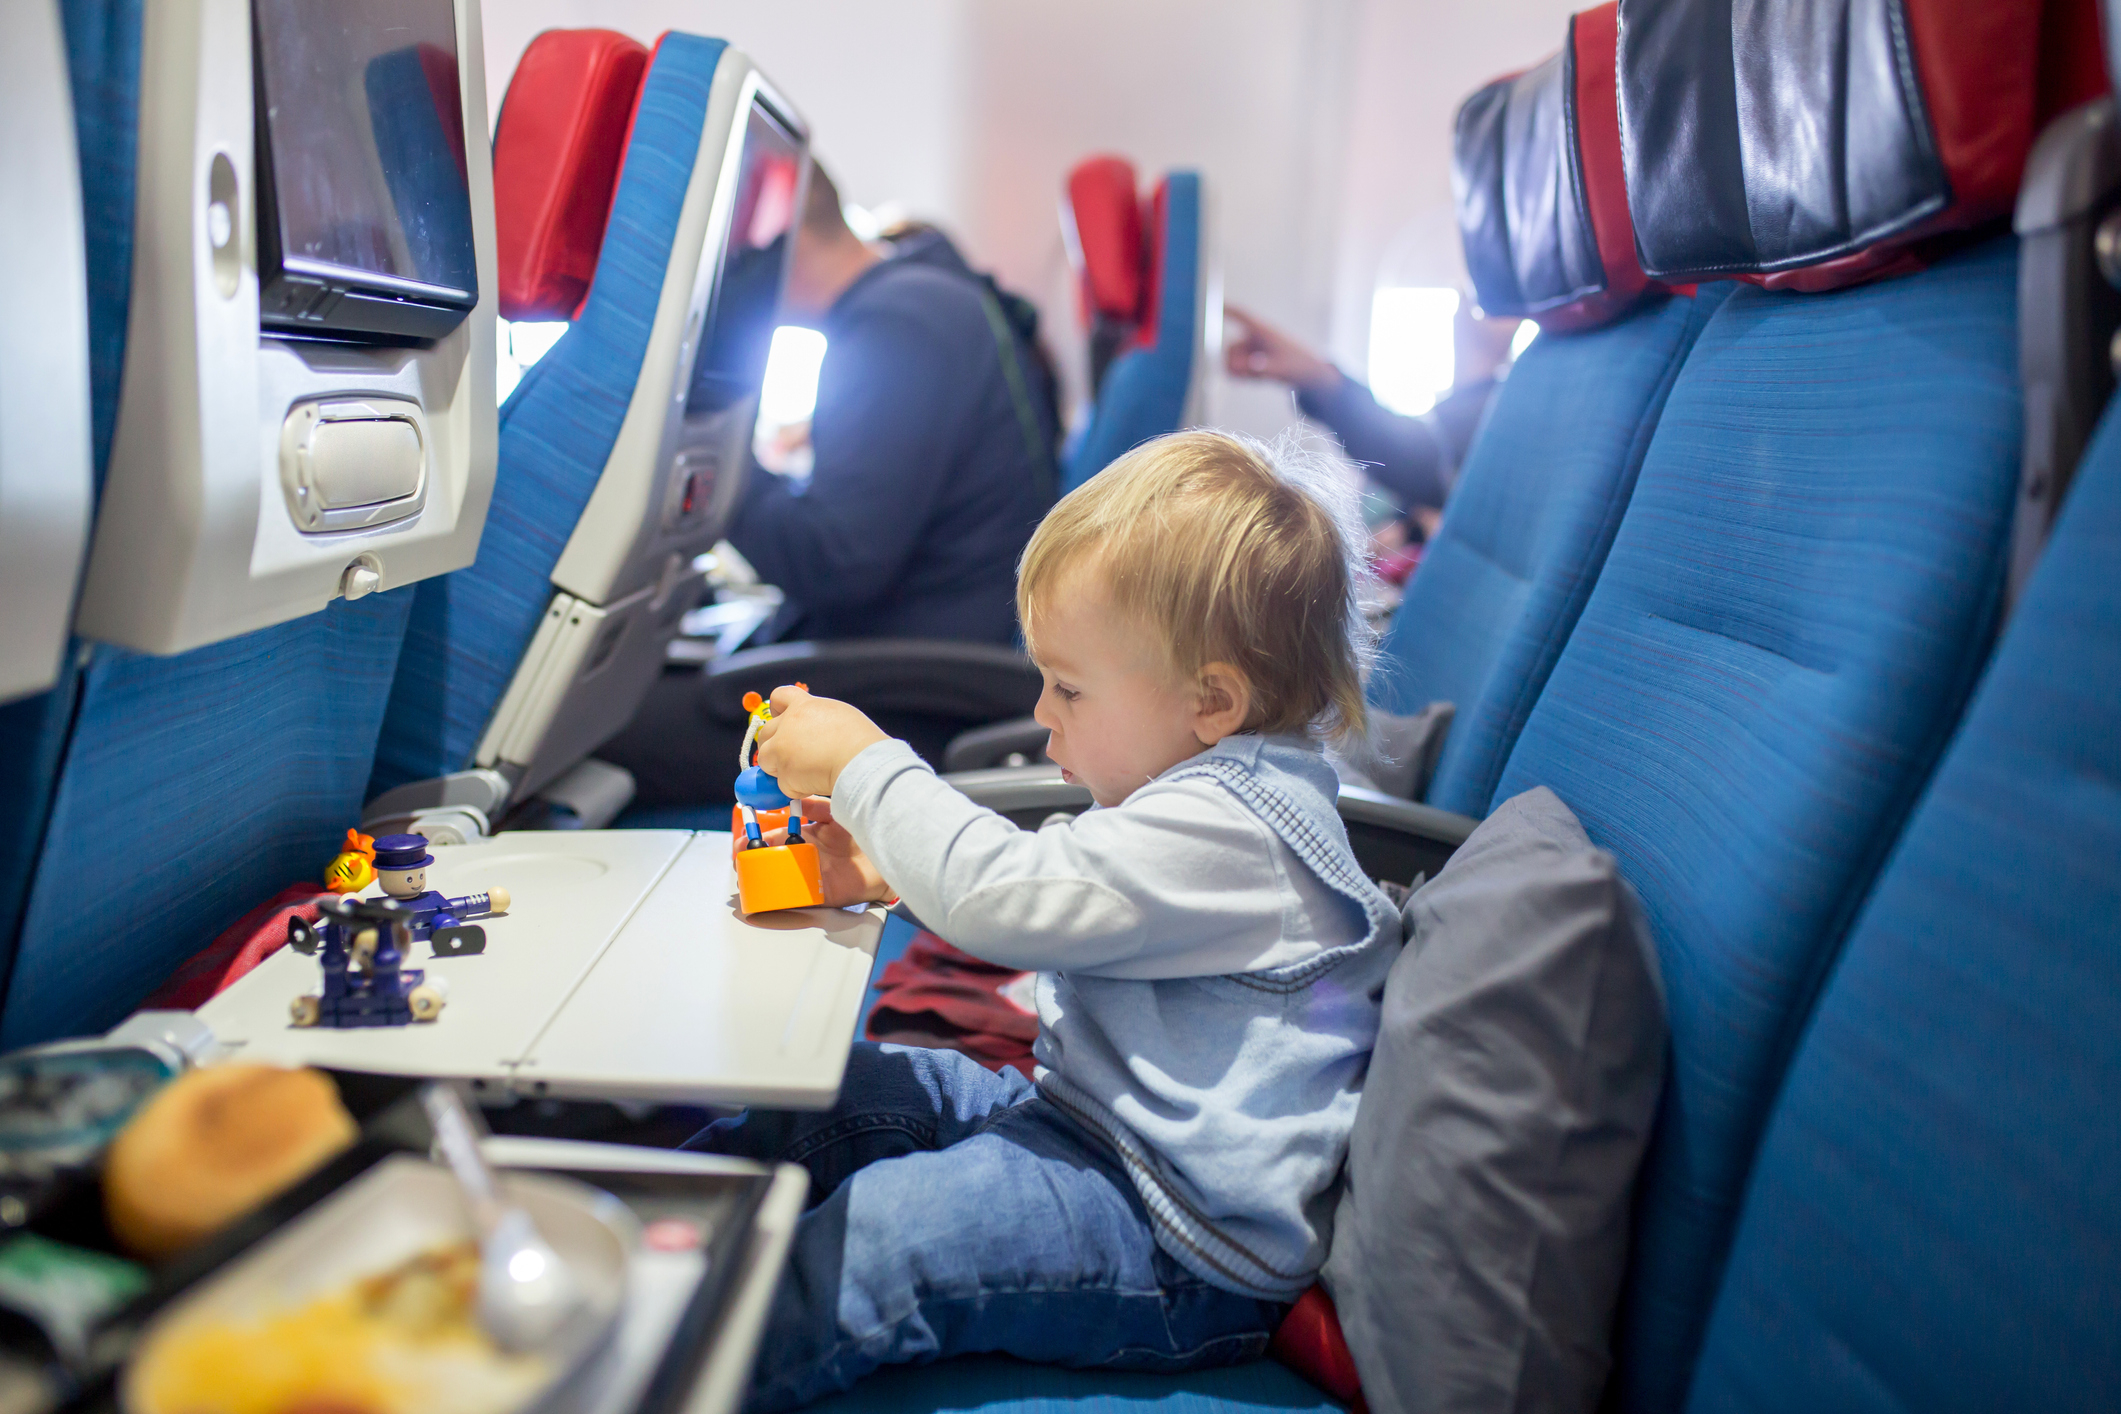 Child playing with toys on airplane tray table, seated in cabin